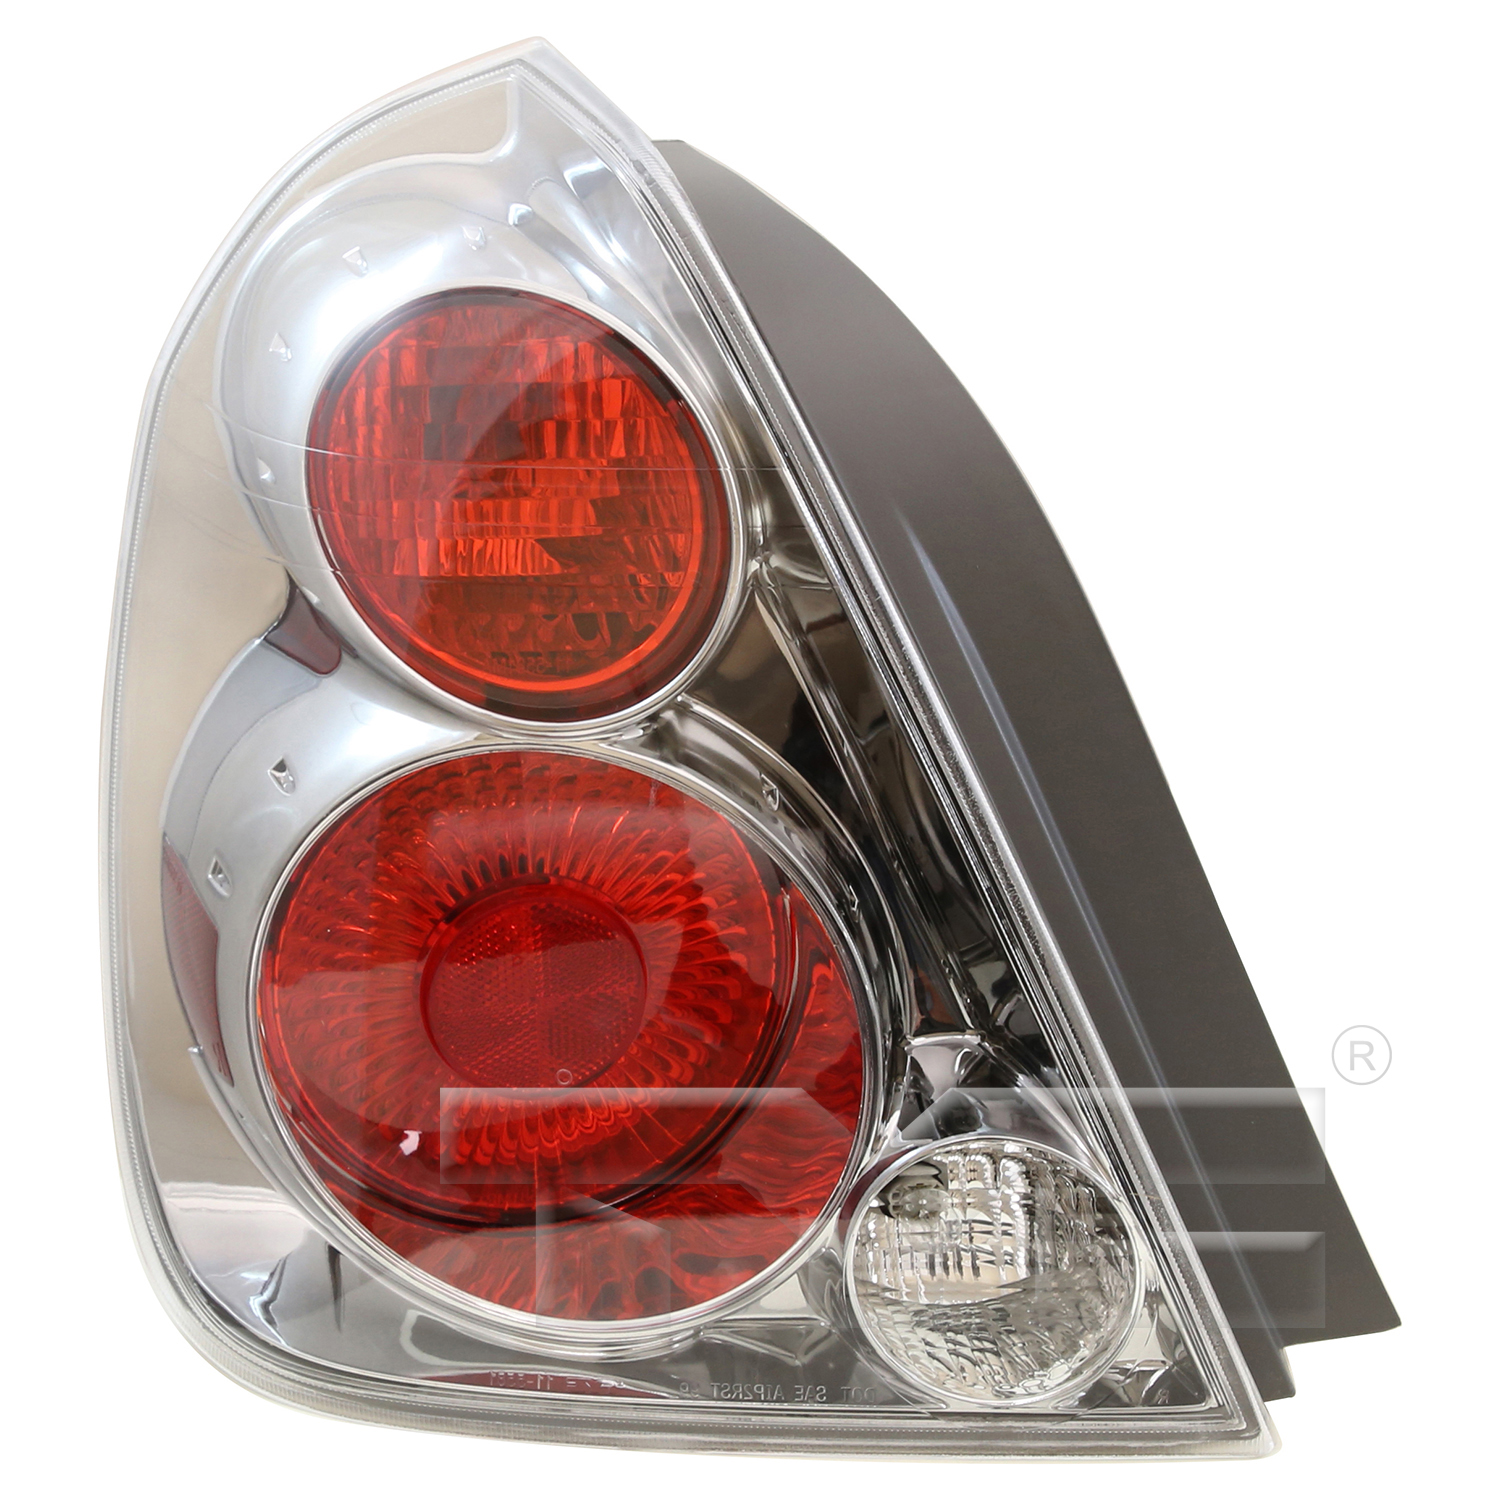 Aftermarket TAILLIGHTS for NISSAN - ALTIMA, ALTIMA,05-06,LT Taillamp assy